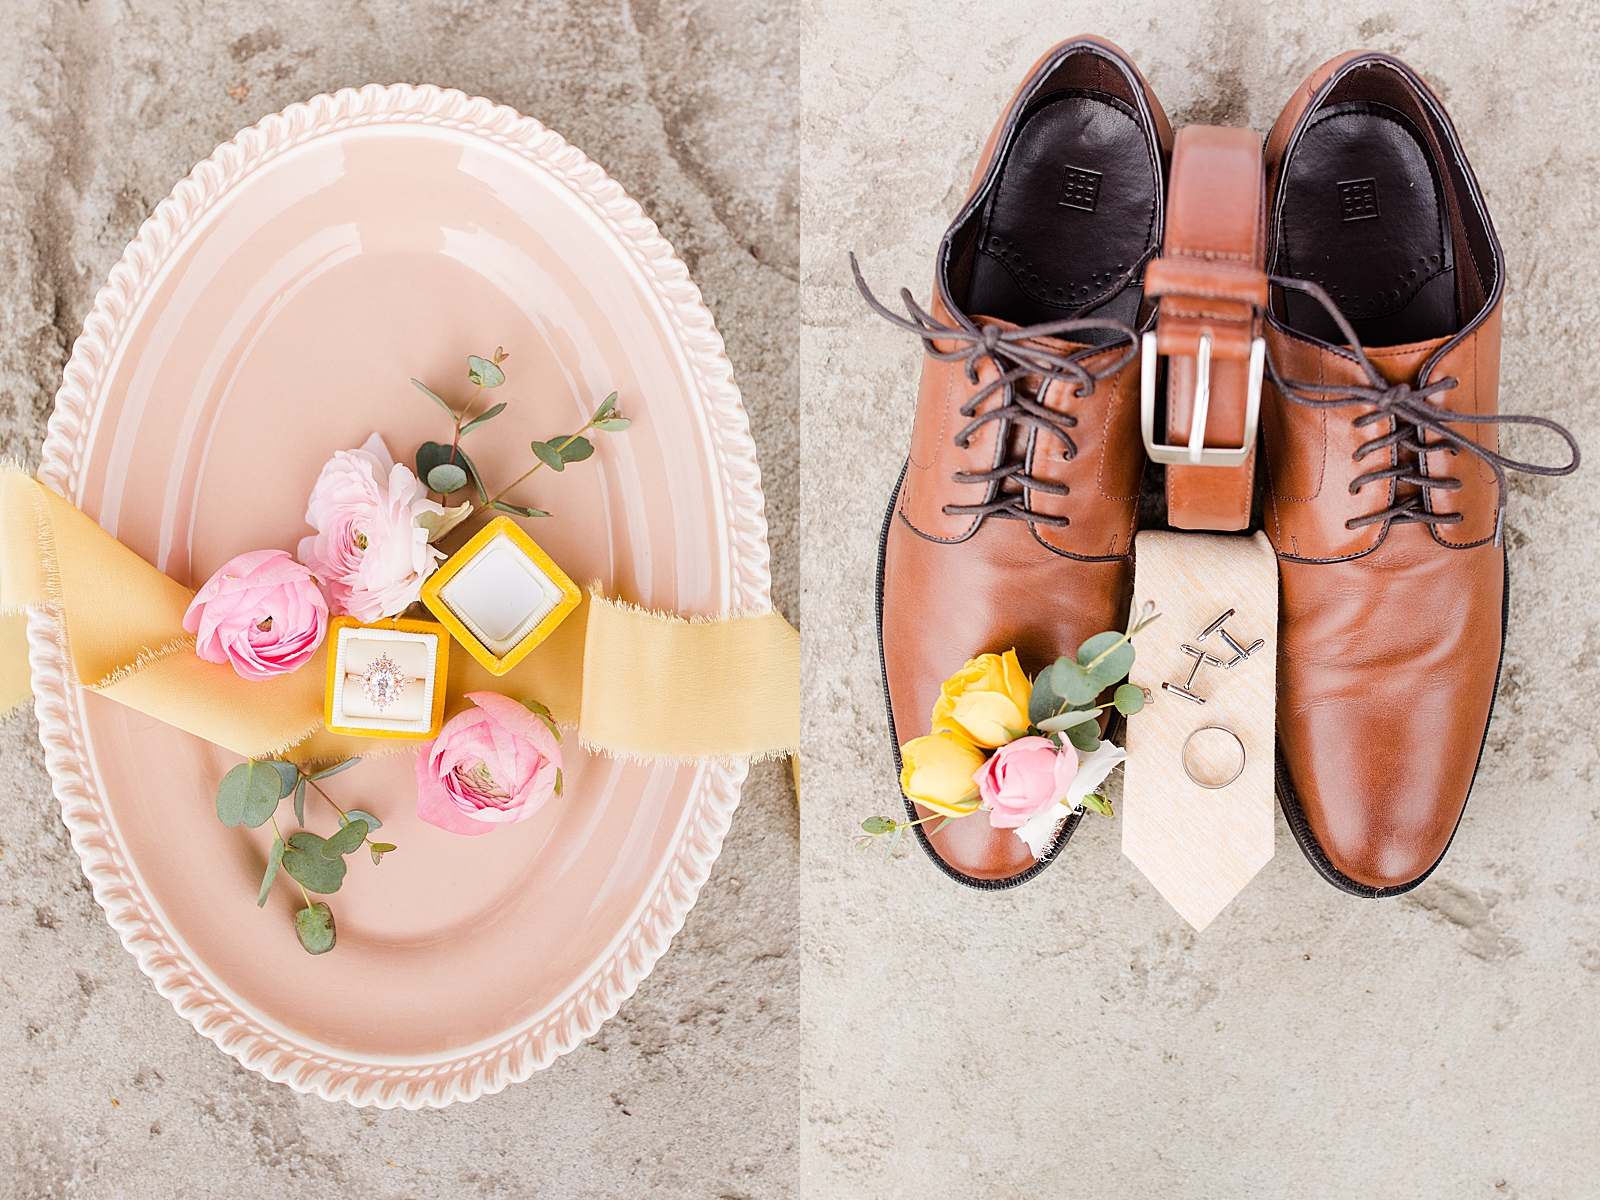 Hackney Warehouse Wedding Details of Brides Ring in Yellow box on Pink Dish and Grooms Shoes Belt Tie Cufflinks and Boutonniere Photos